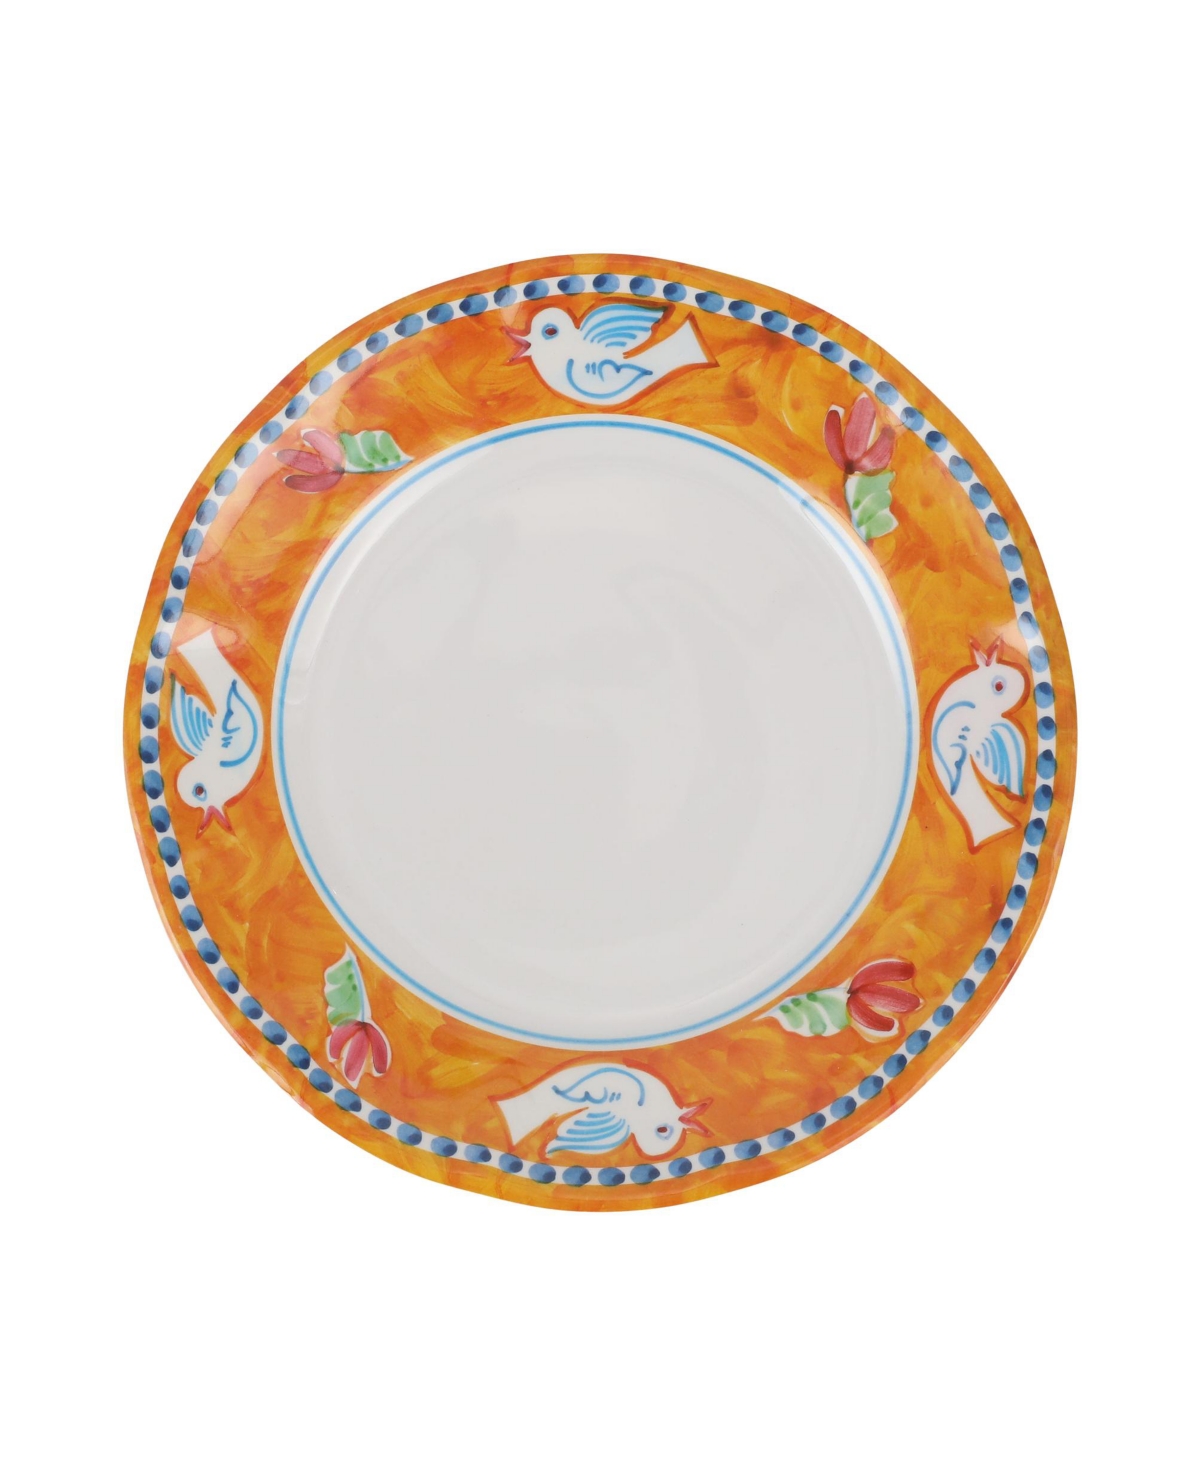 Melamine Campagna Uccello Dinner Plate - Open Misce